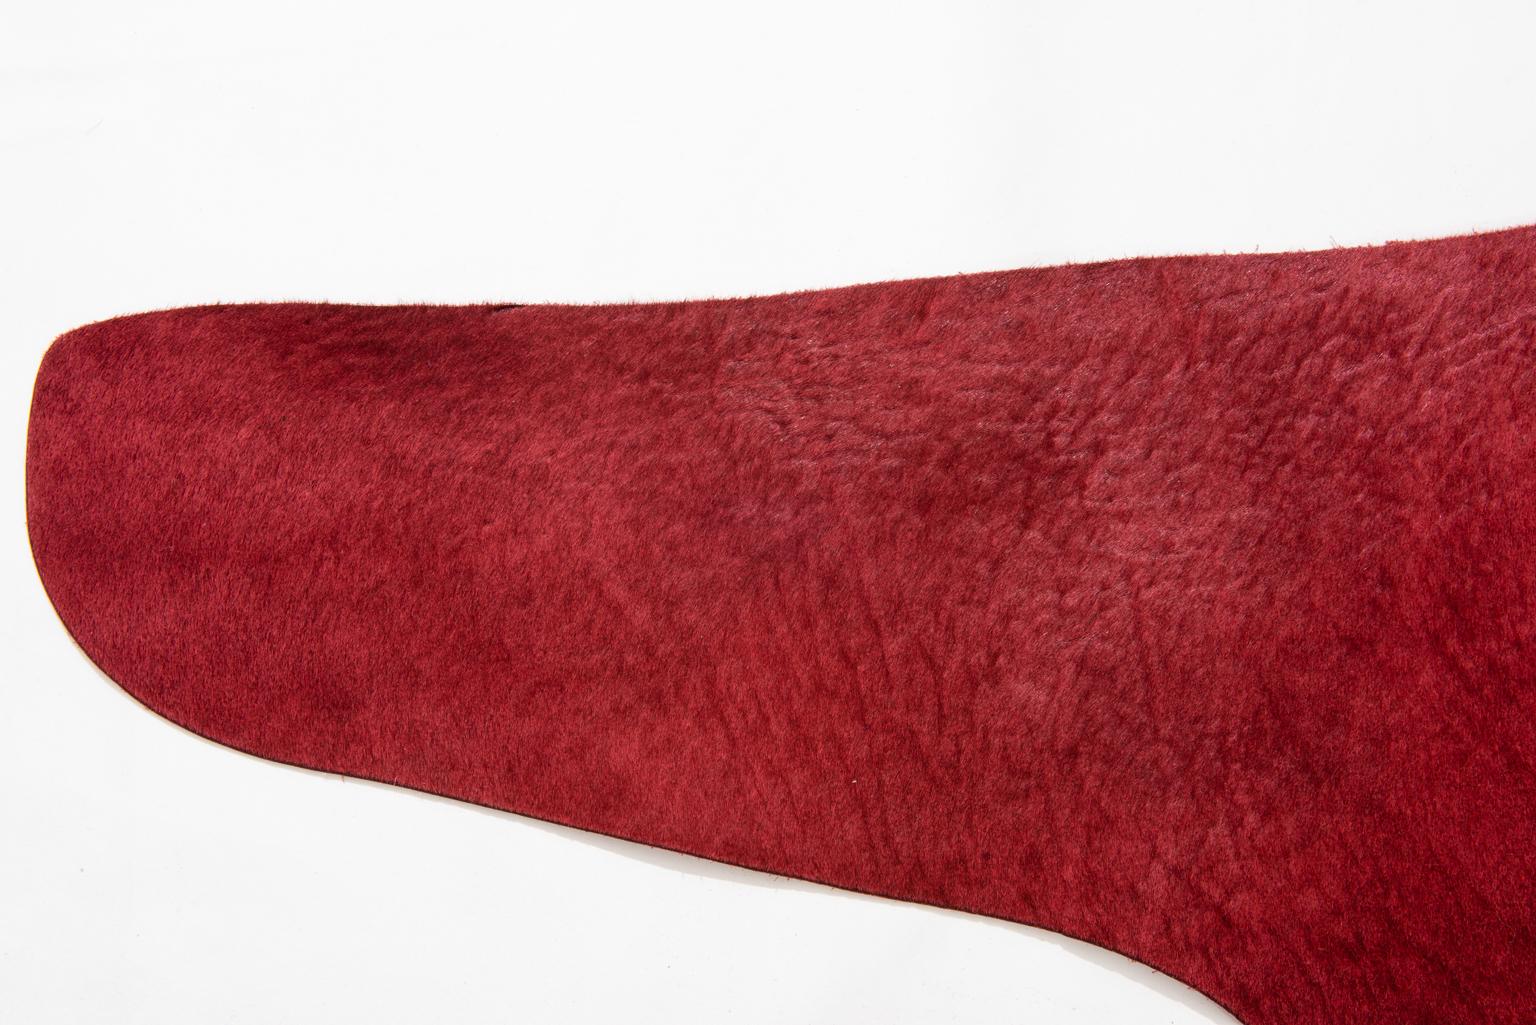 Animal Skin Leather Carpet Red Colored